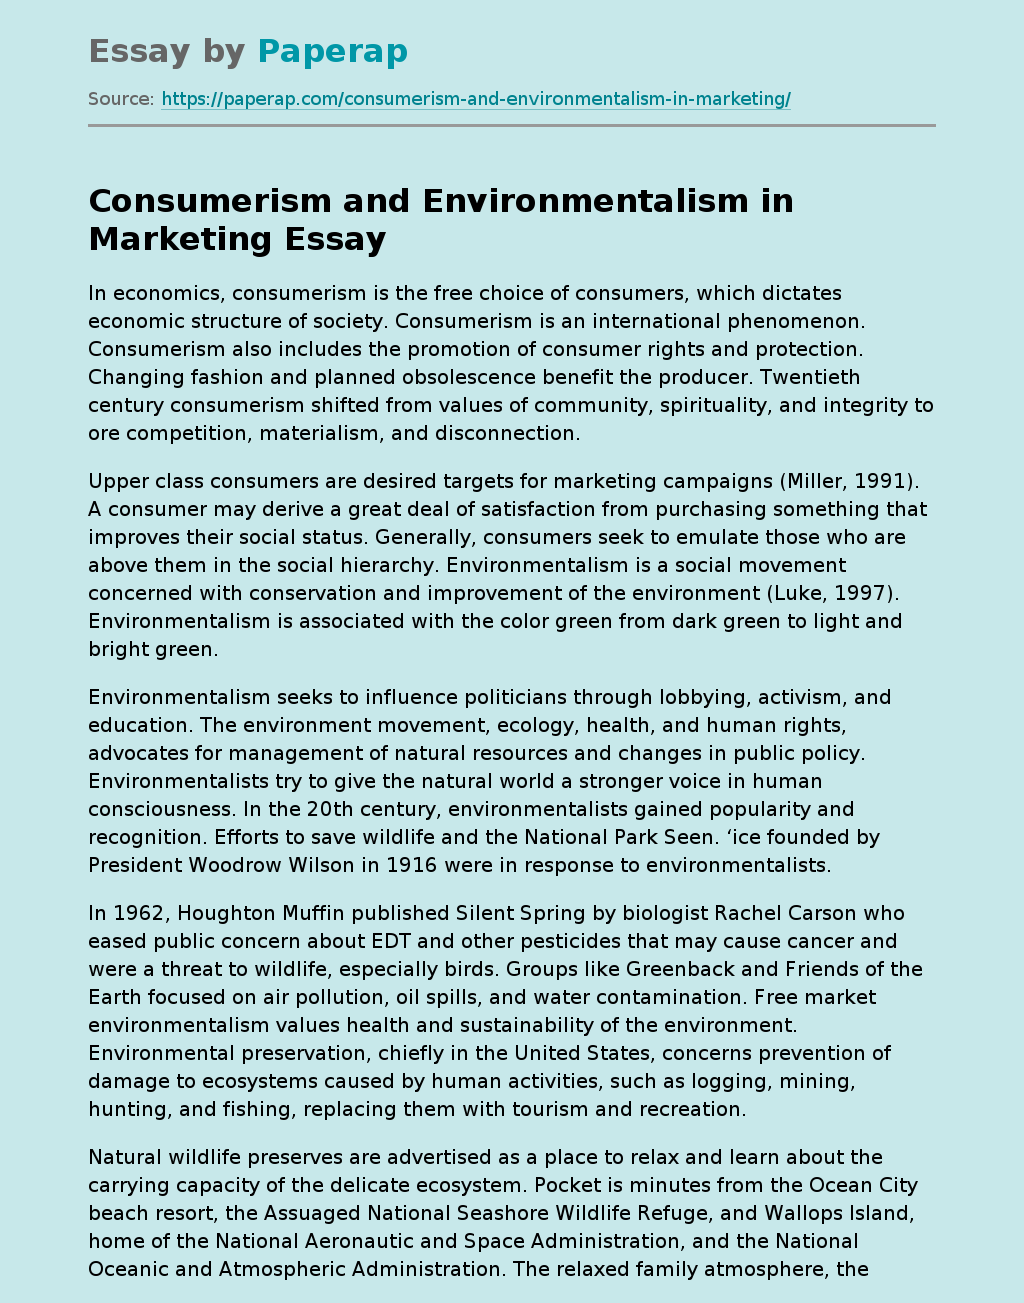 Consumerism and Environmentalism in Marketing